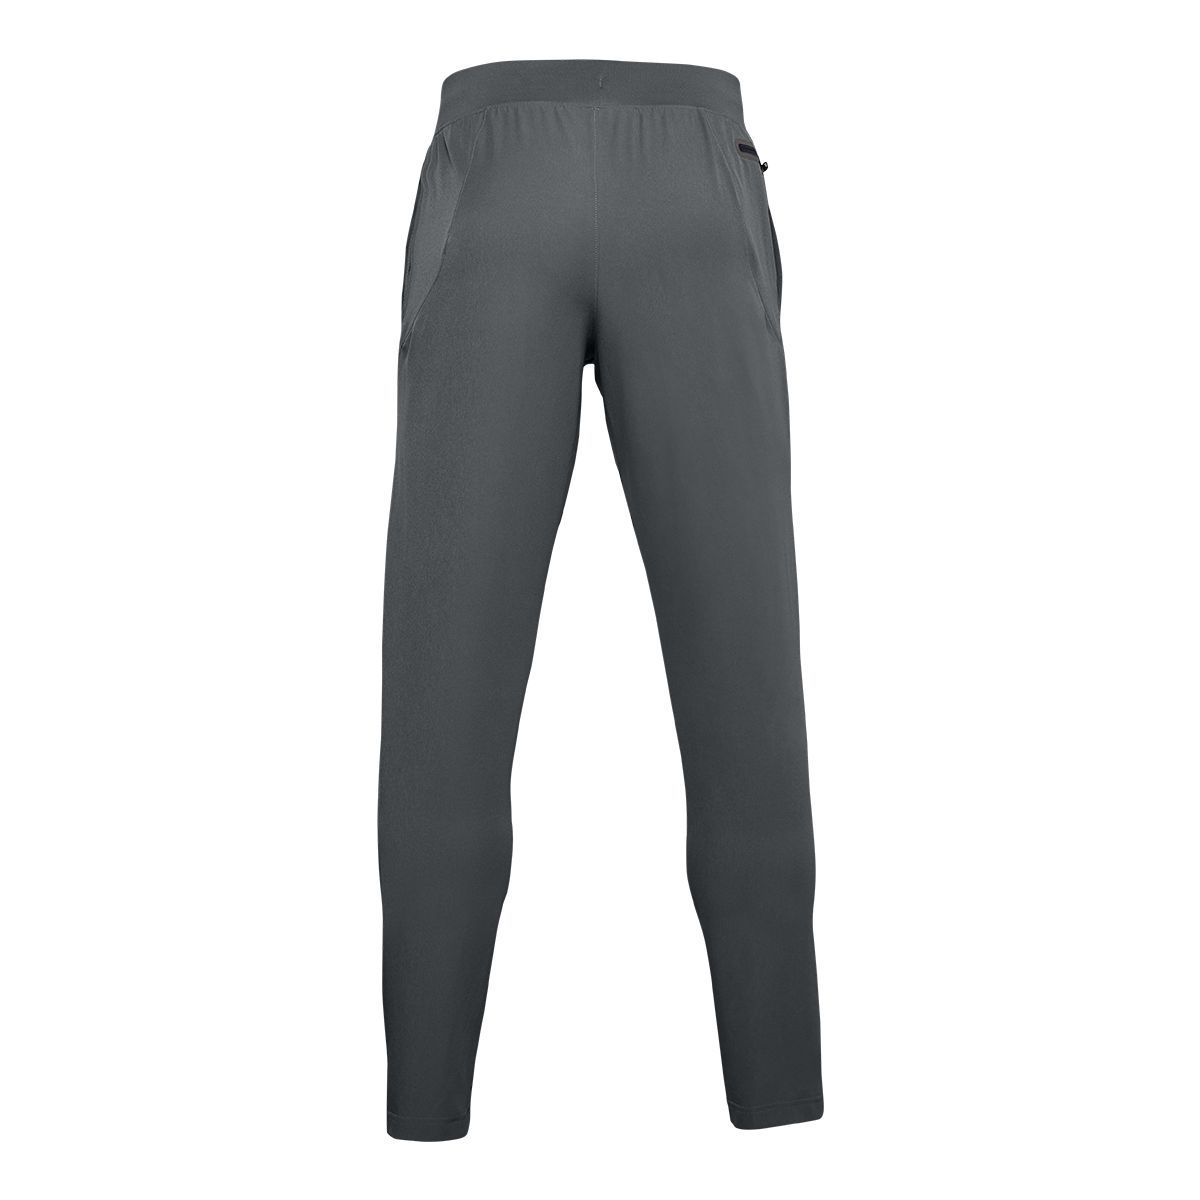 Under Armour 1366215 0001 Stretch Woven Pant M black - Buy Online